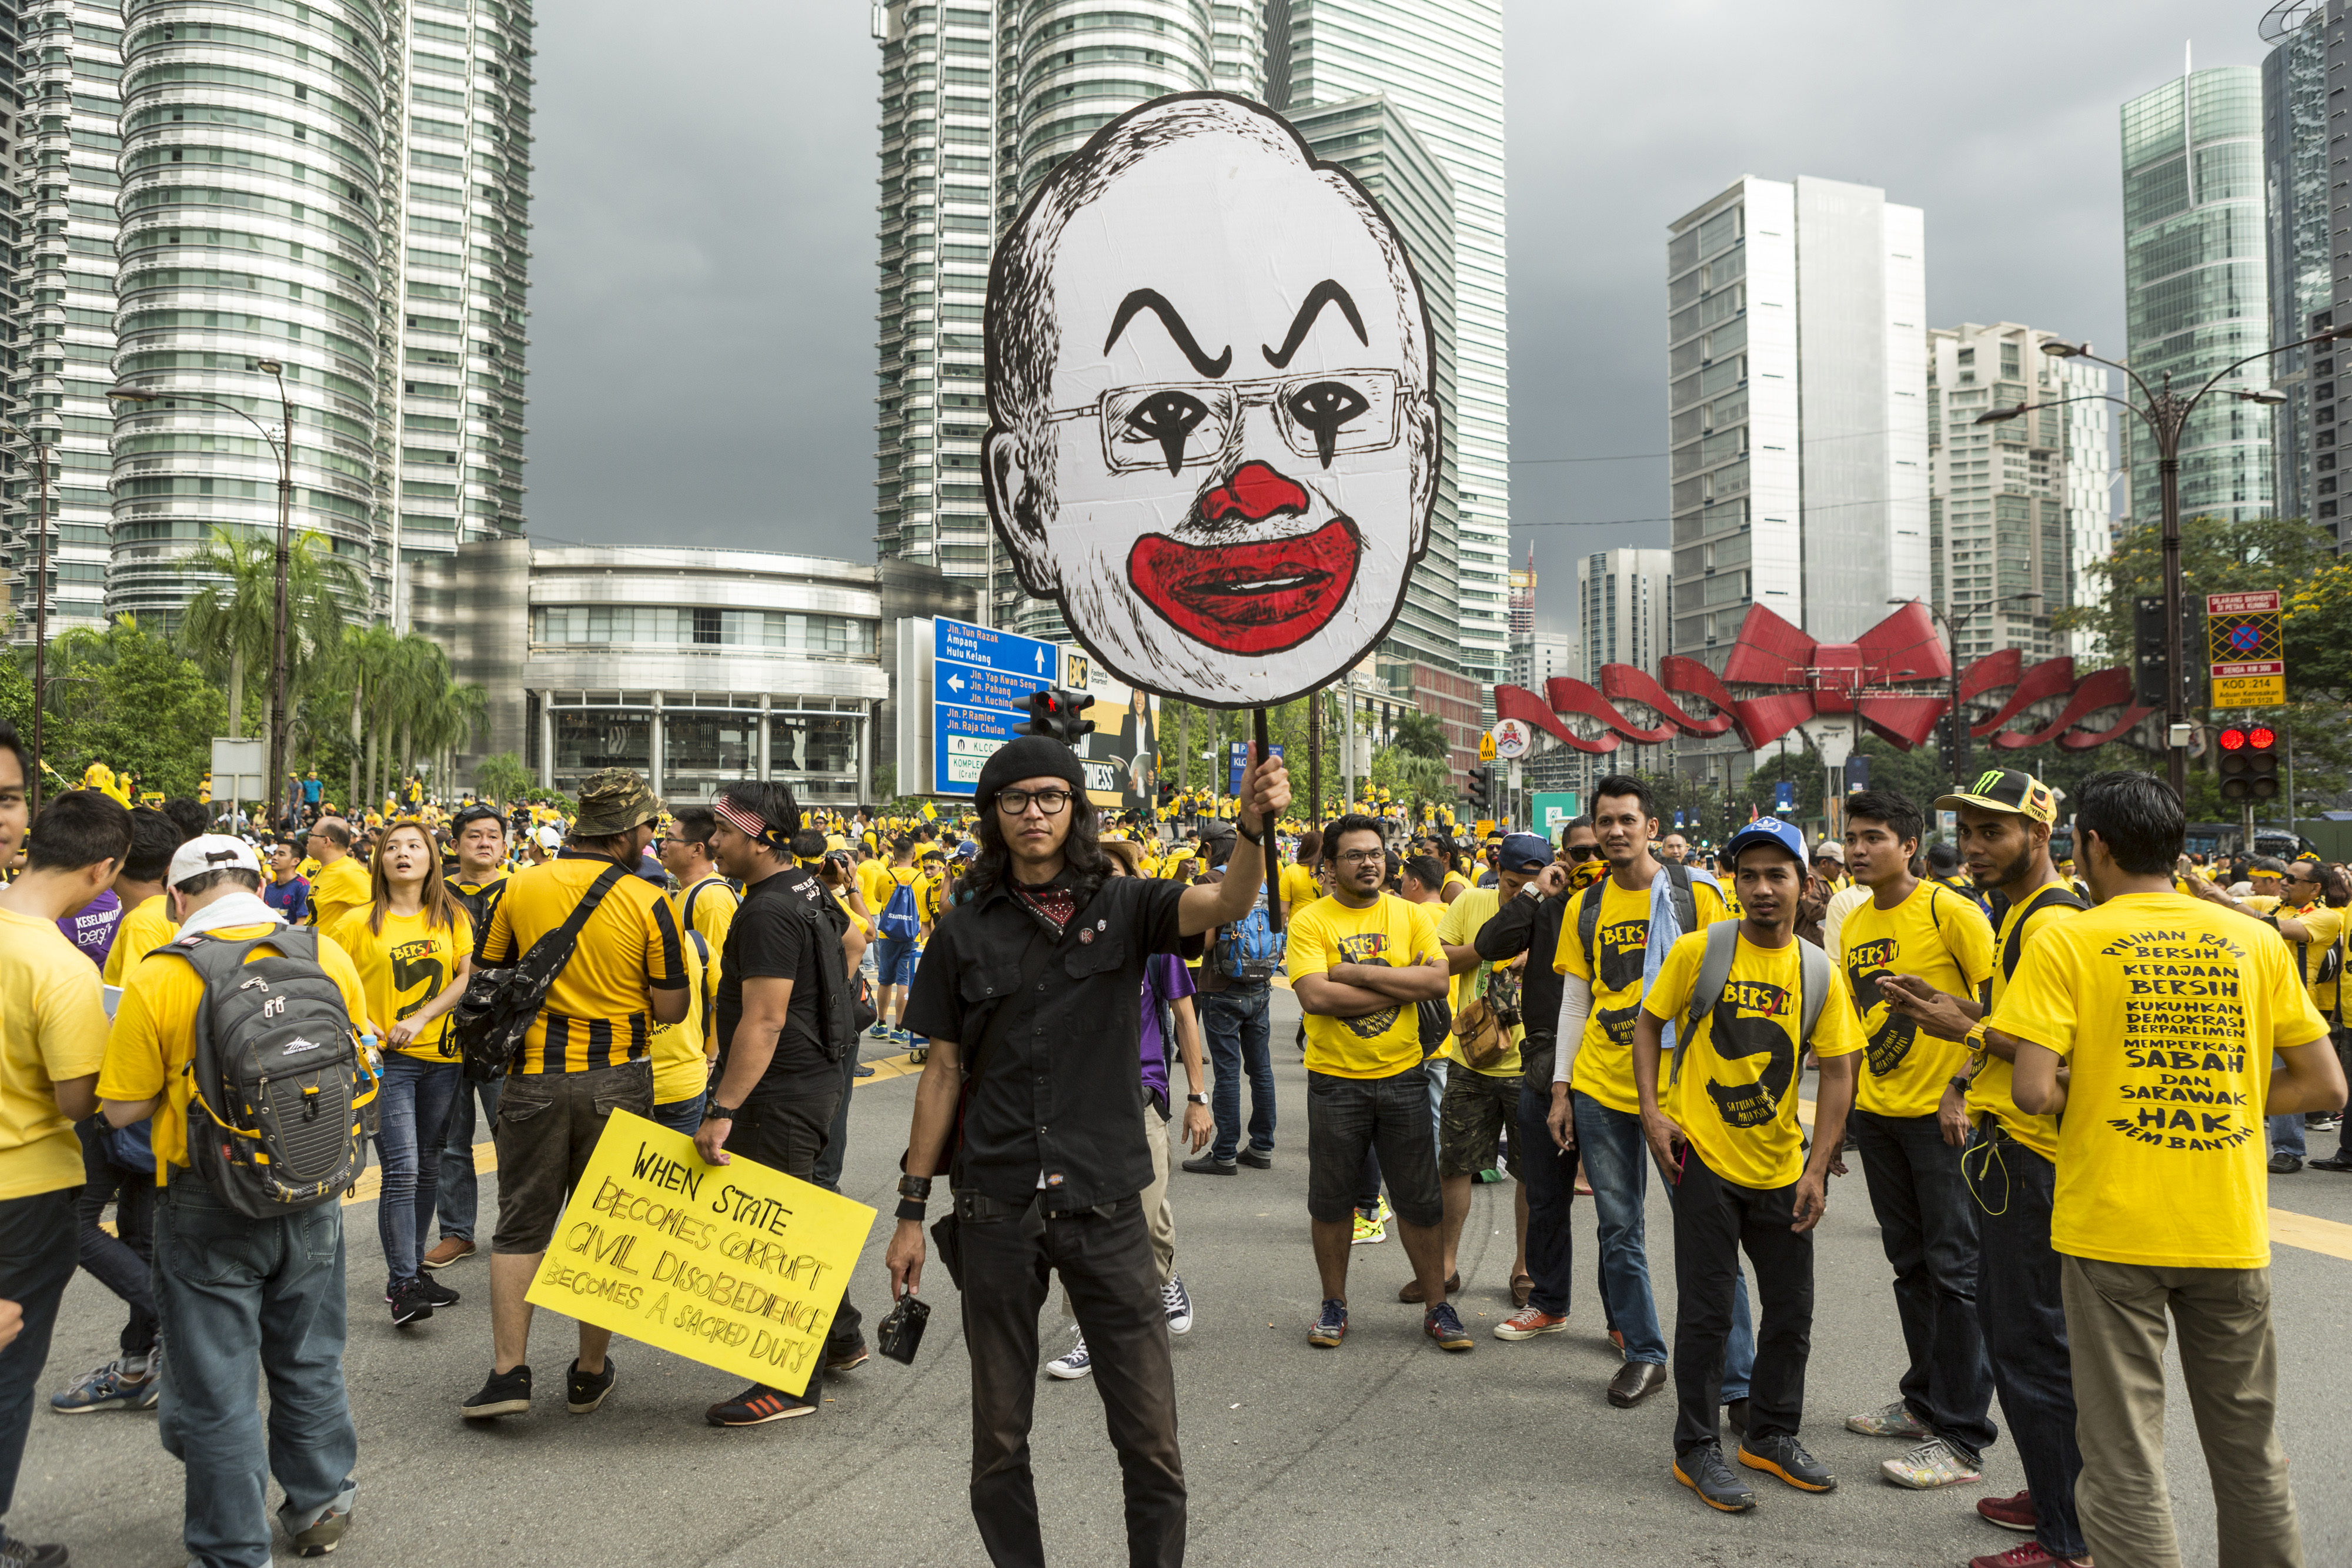 A protester holds up a placard near the Petronas Twin Towers during the Coalition for Clean and Fair Elections rally, also known as Bersih, in Kuala Lumpur on Nov. 19, 2016 (Charles Pertwee—Bloomberg/Getty Images)